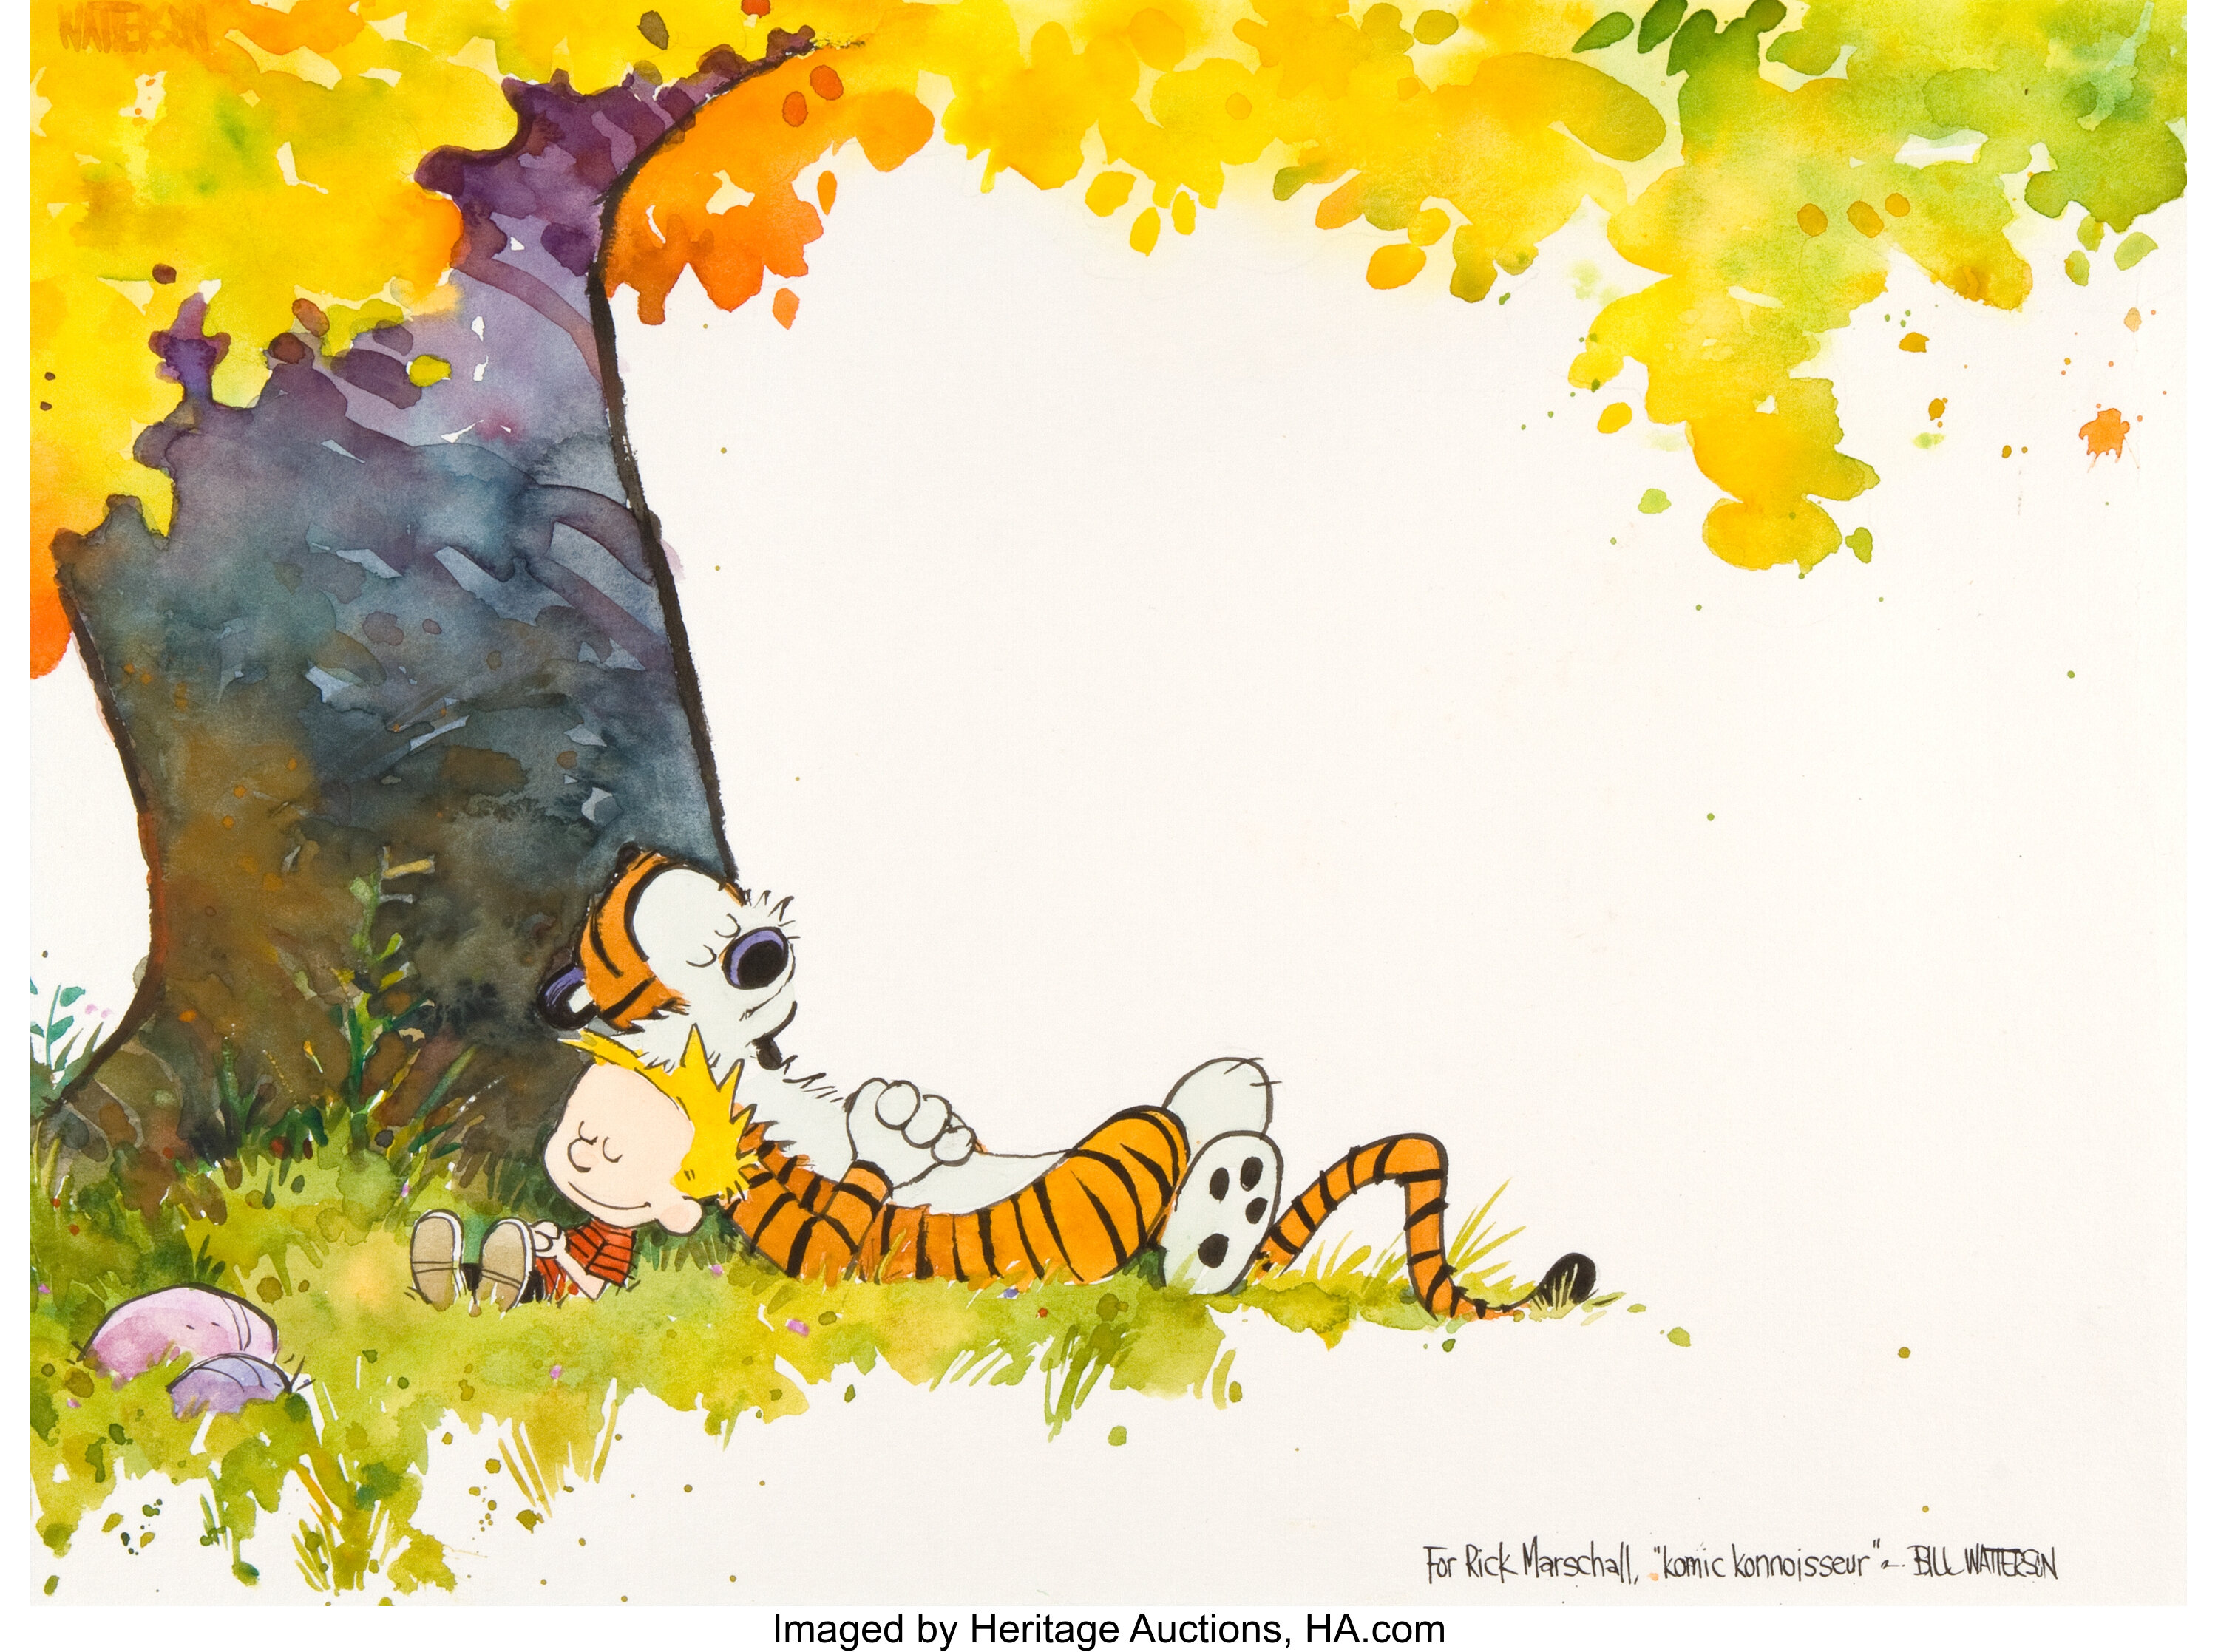 bill-watterson-calvin-and-hobbes-1989-90-calendar-cover-watercolor-lot-92293-heritage-auctions